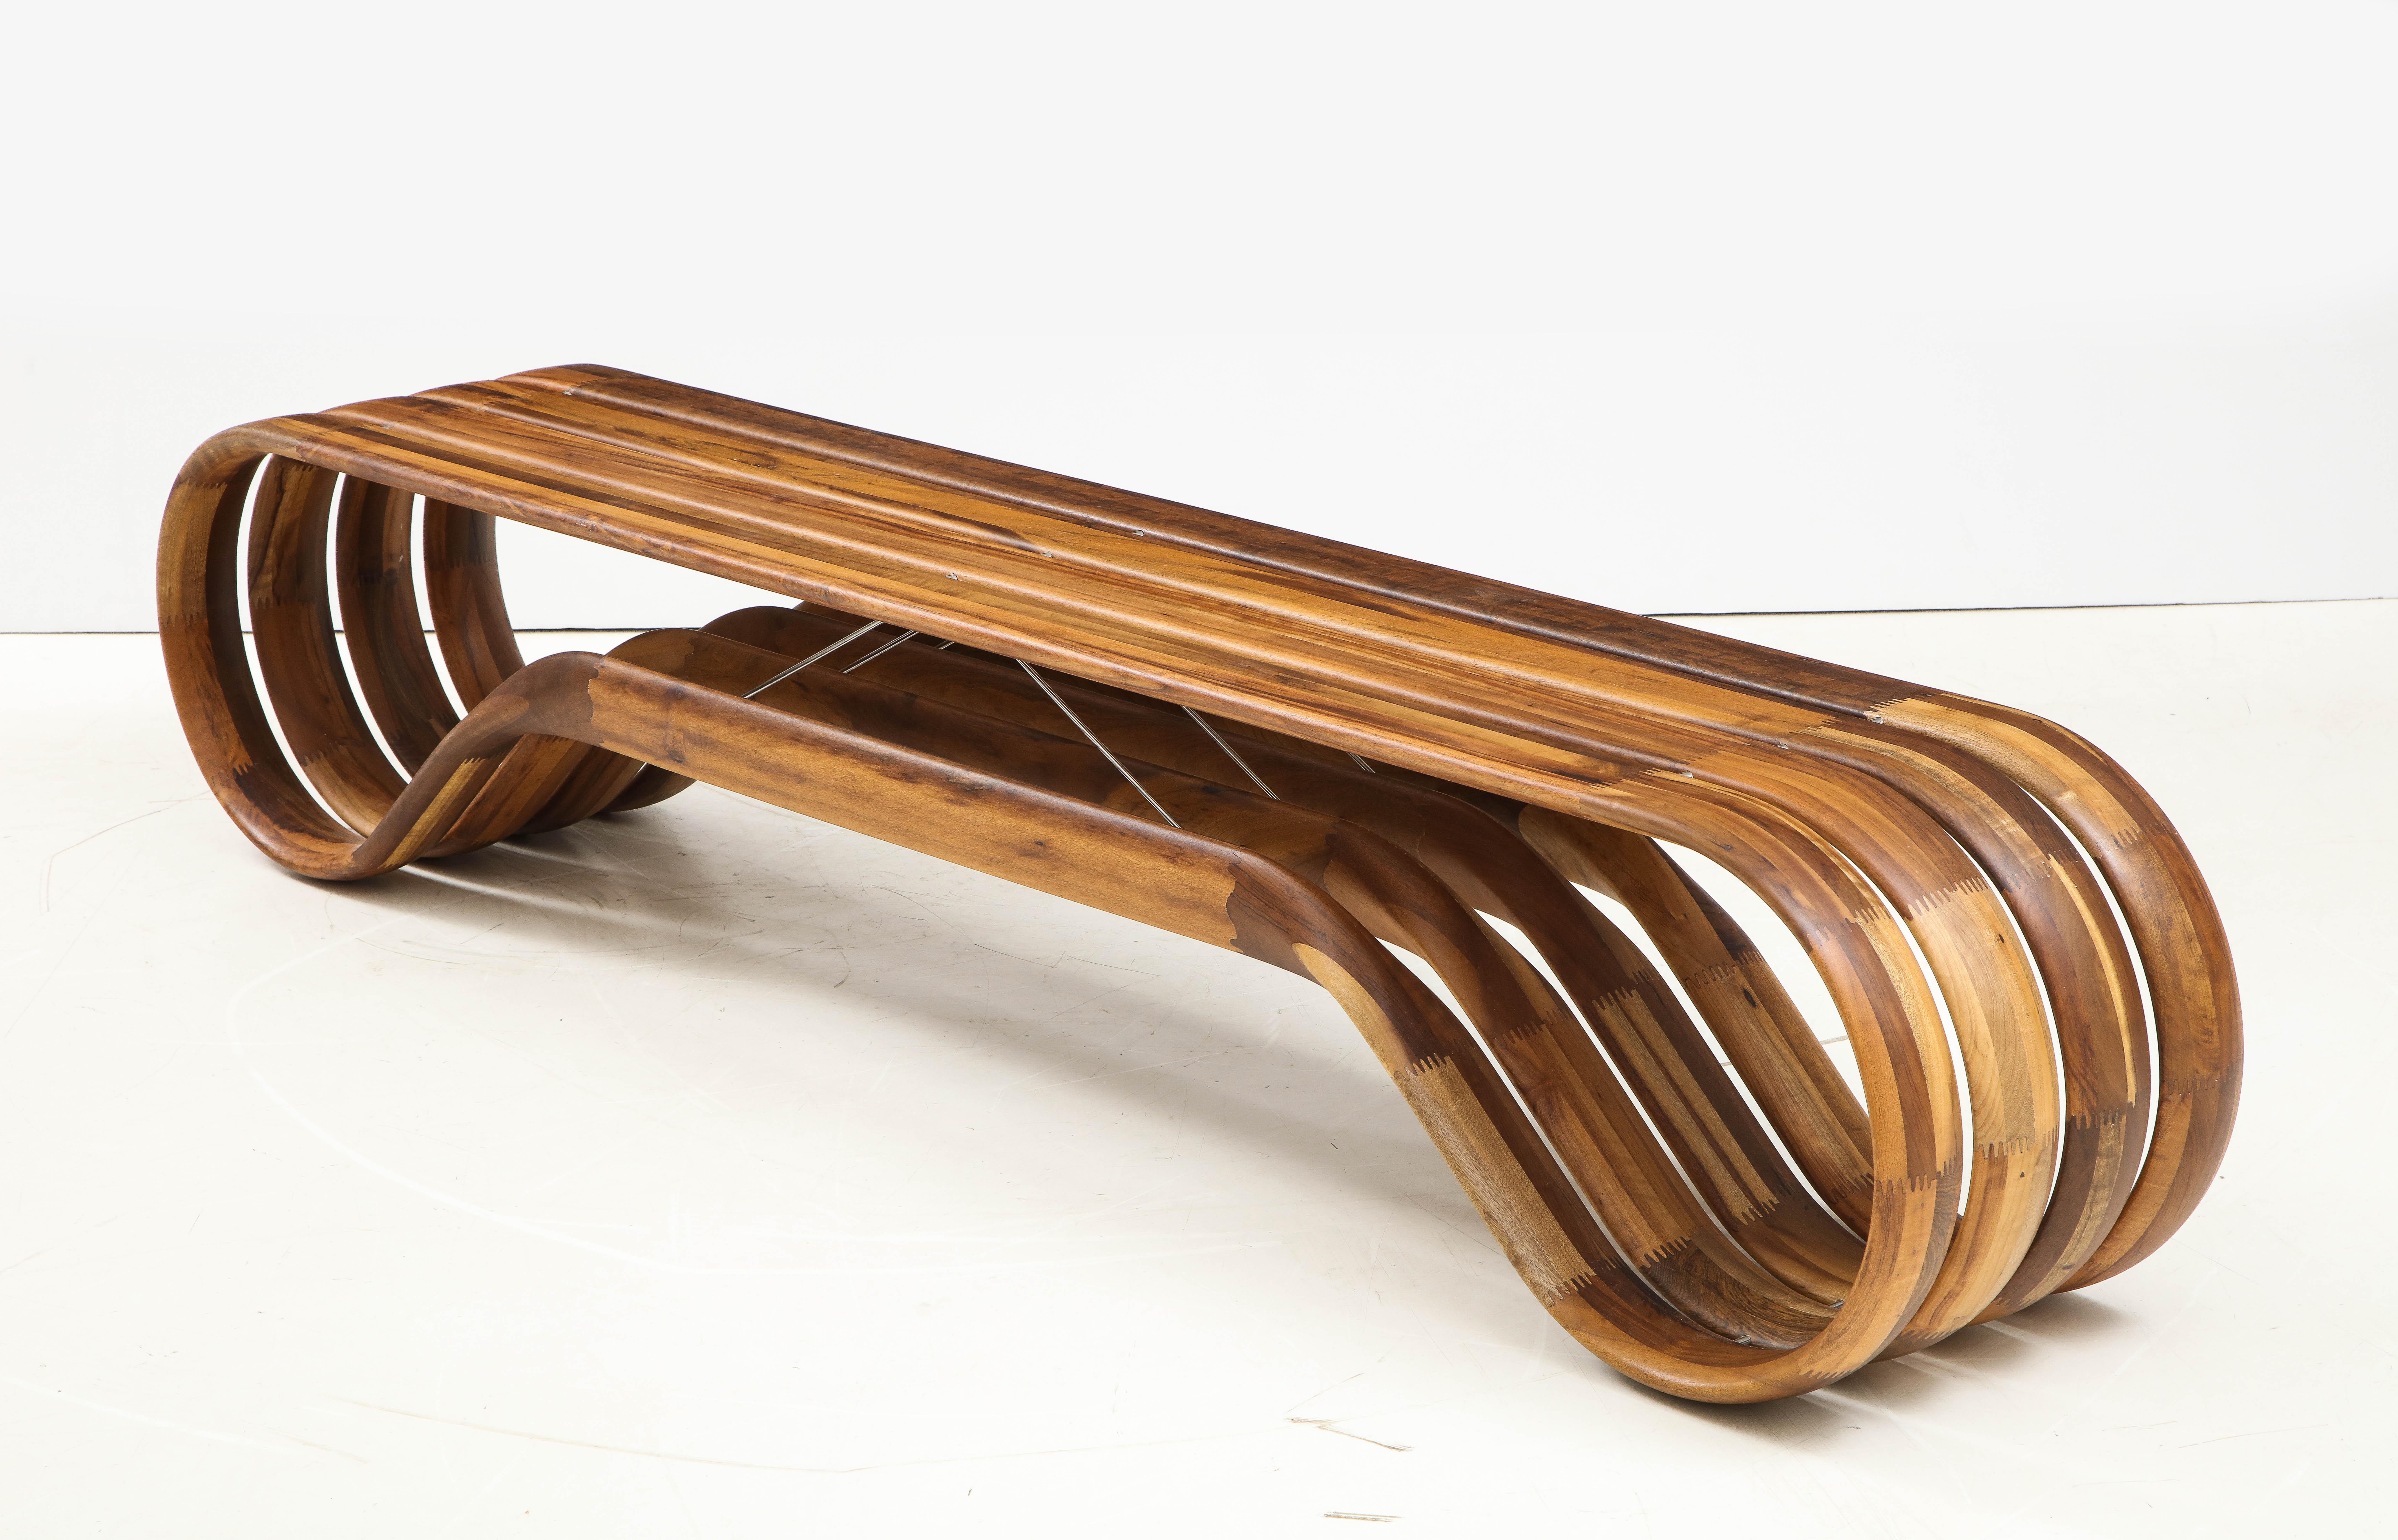 Stainless Steel Contemporary Infinito Wood Bench by Guto Índio da Costa, Brazil, 2019